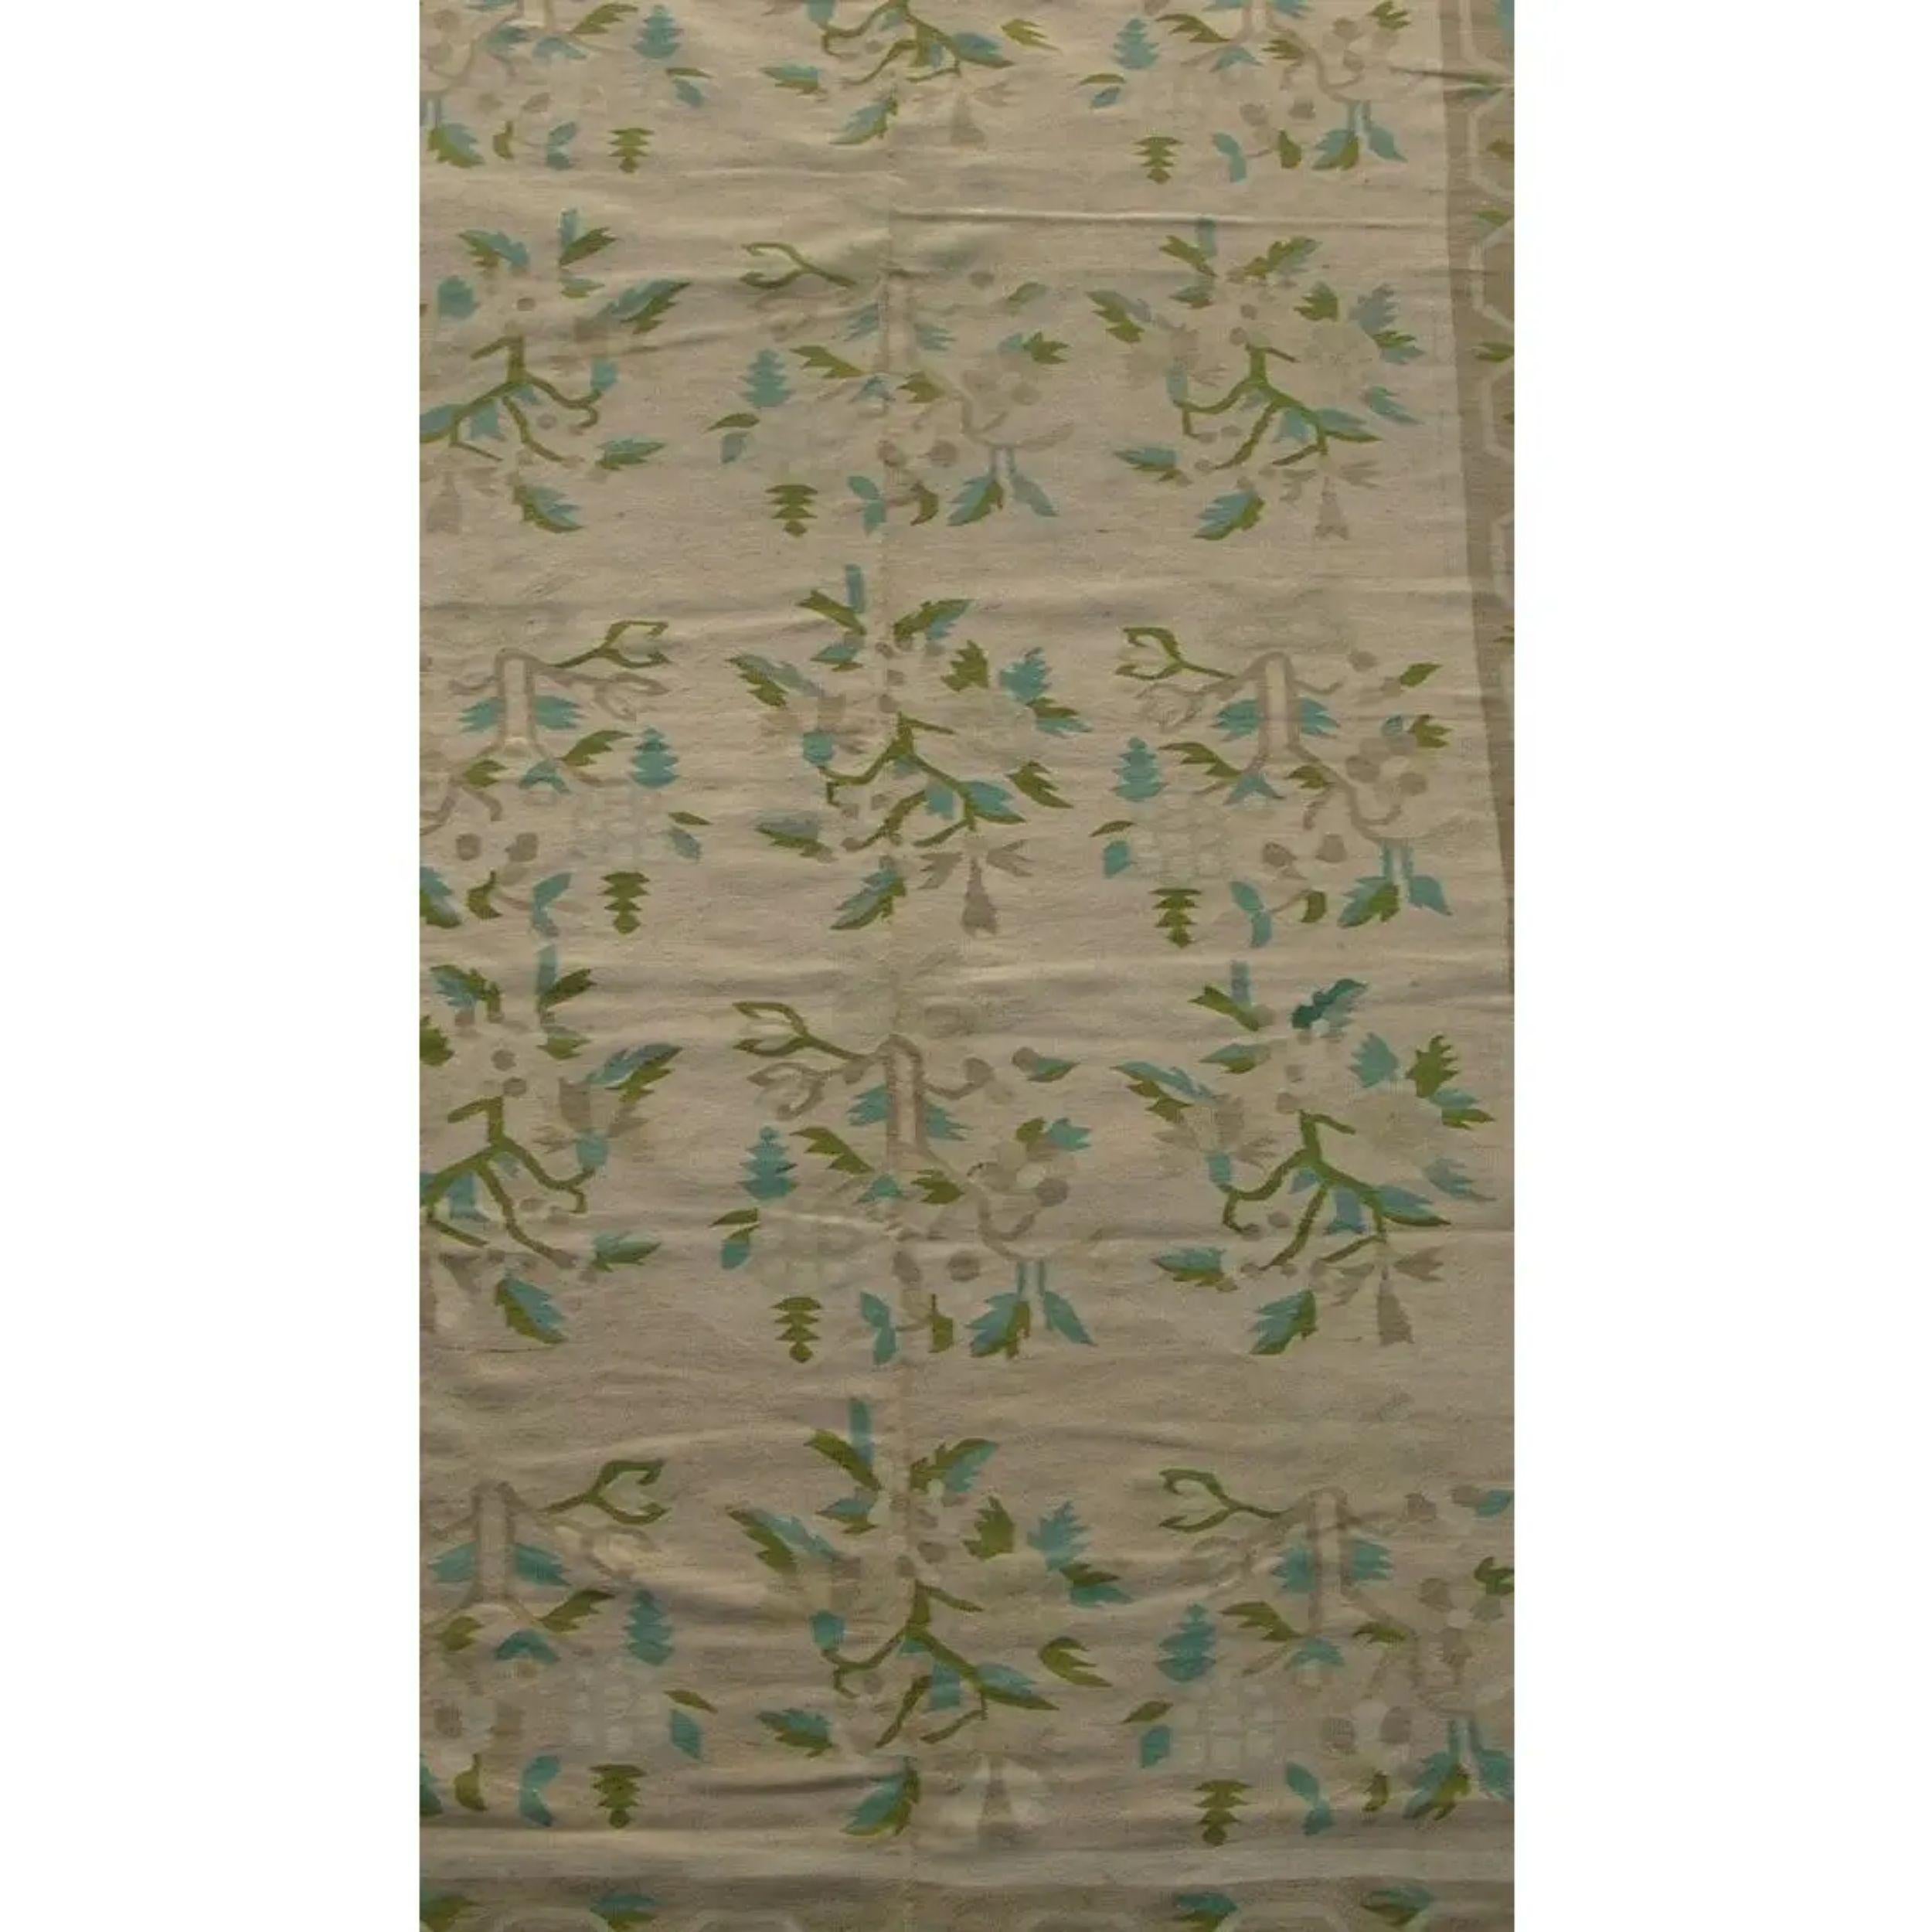 Antique Bessarabian Floral Design Rug 10'2'' X 6'2'' In Good Condition For Sale In Los Angeles, US